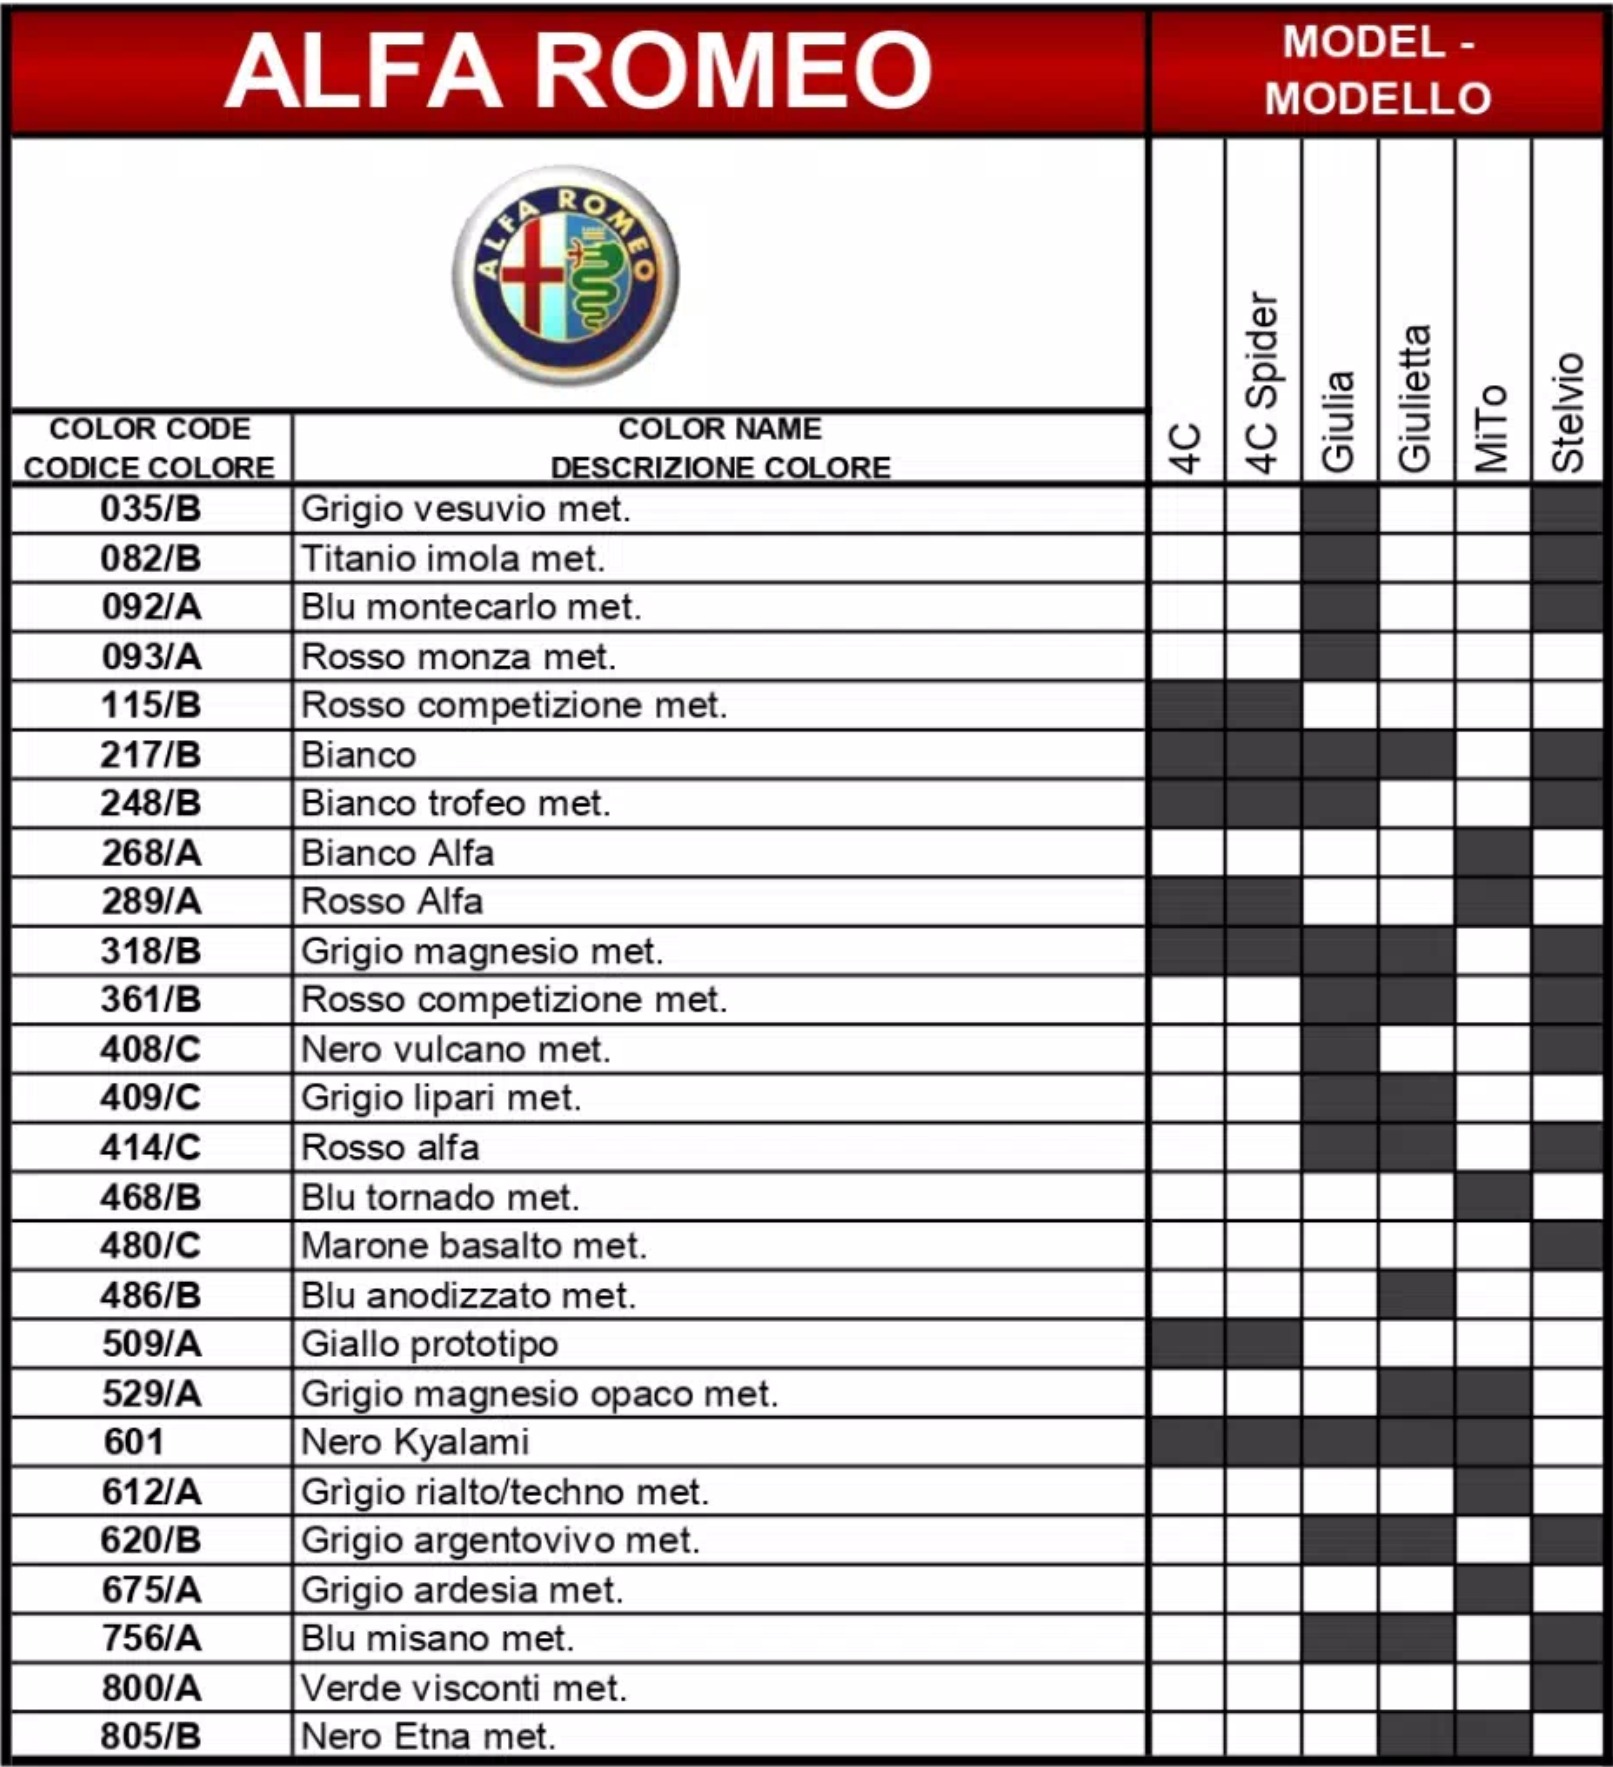 An excel sheet with the Alfa Romeo Logo.Dark colored shades show what color code goes to what car